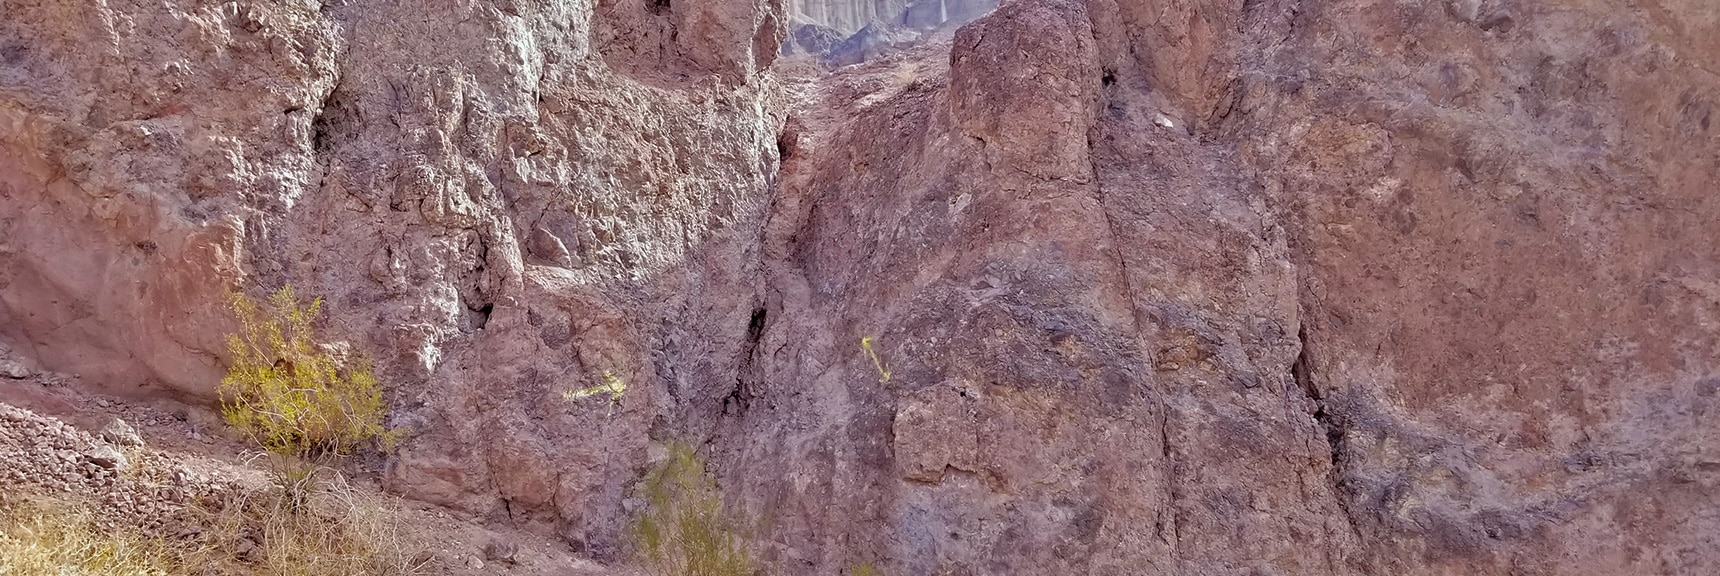 20ft Ascent Up Class 3 Crack. | Arizona Hot Spring | Liberty Bell Arch | Lake Mead National Recreation Area, Arizona